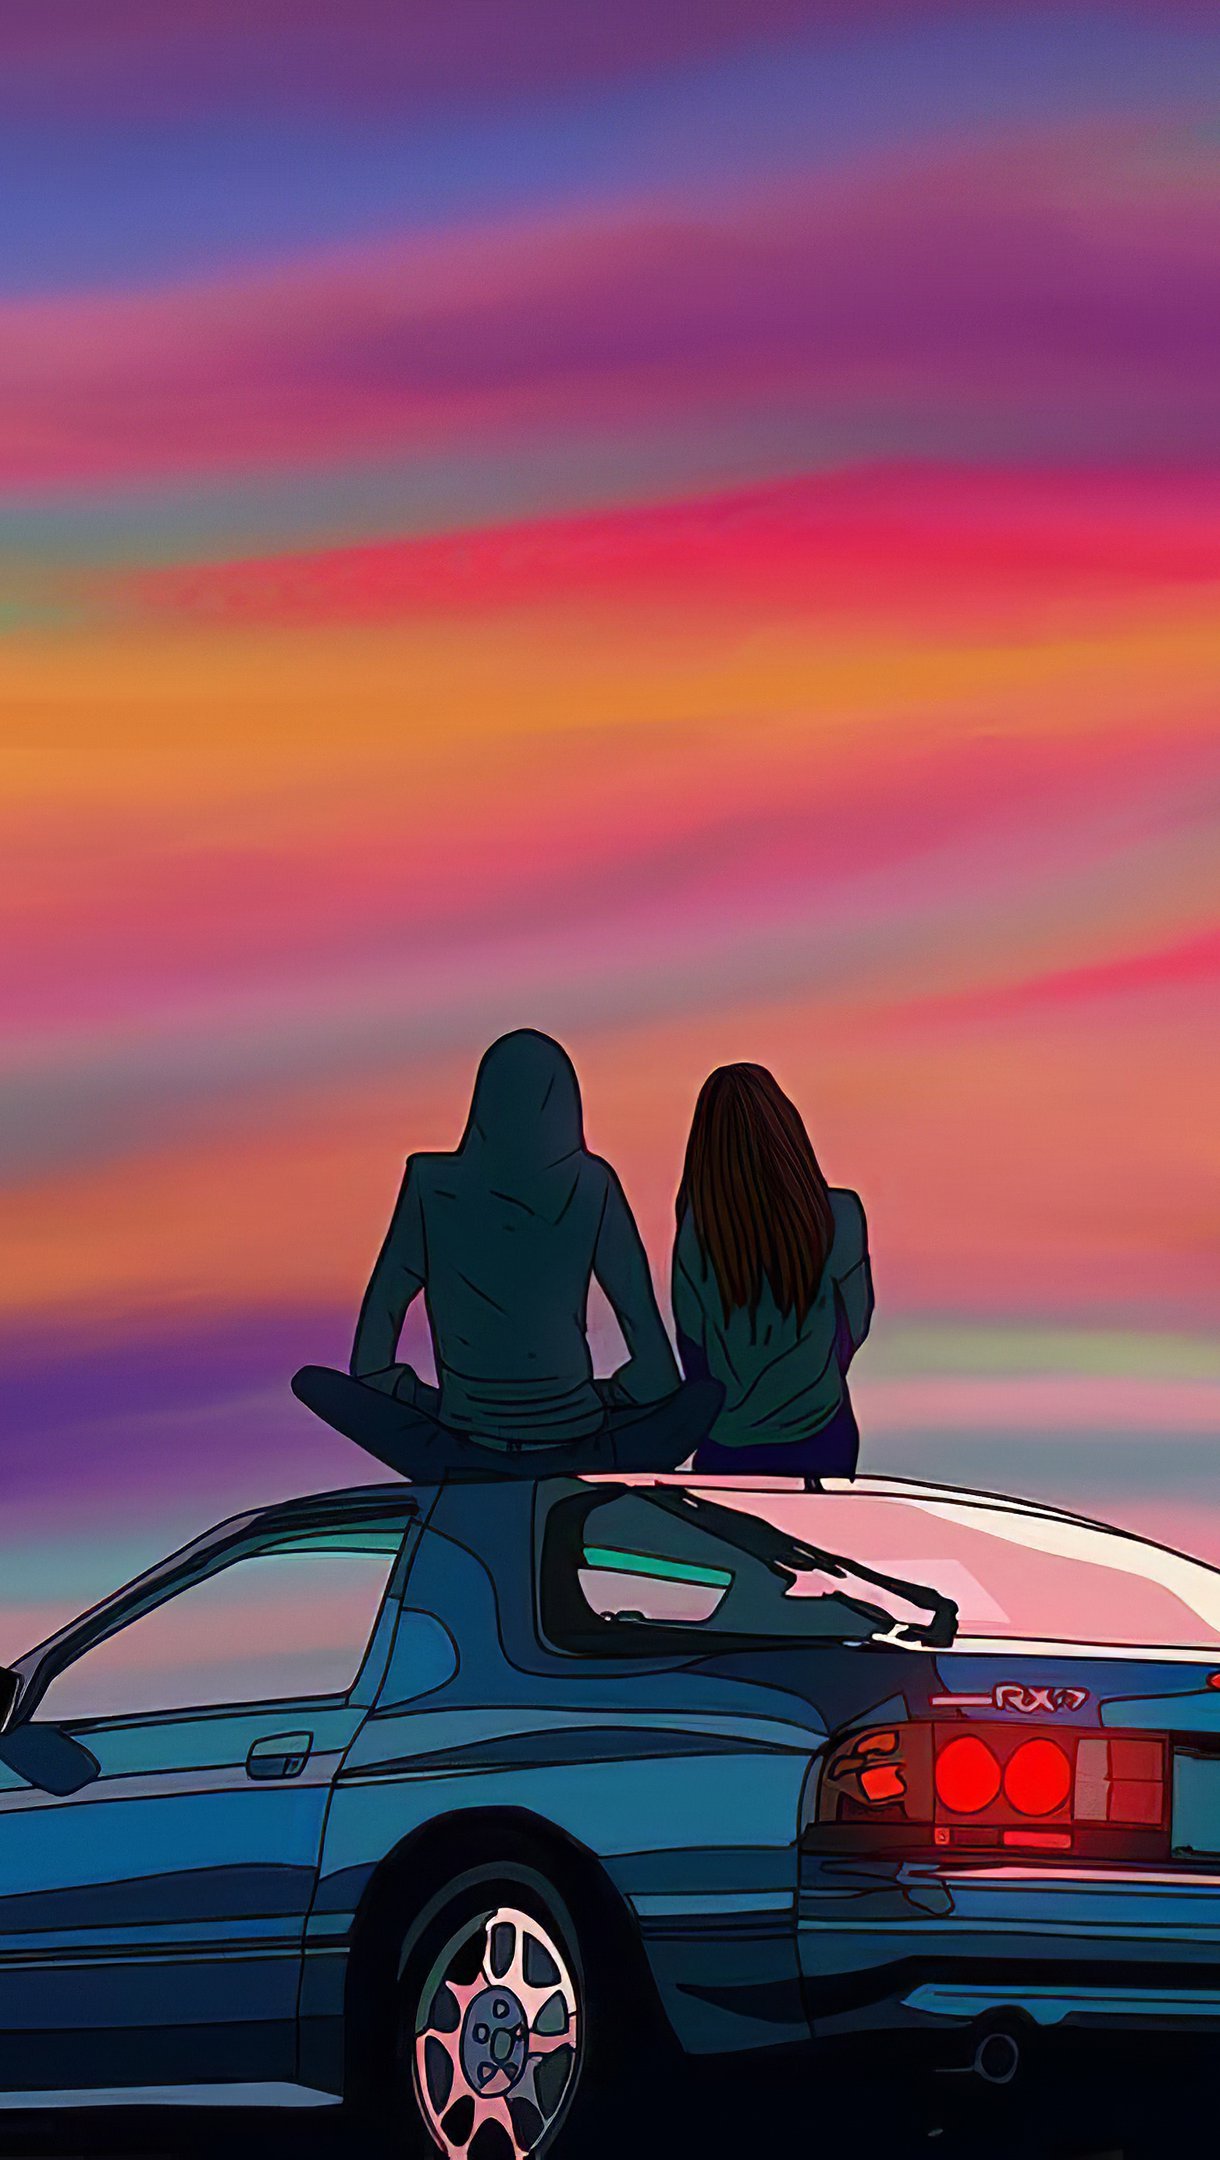 Wallpaper Couple sitting on car at sunset Vertical